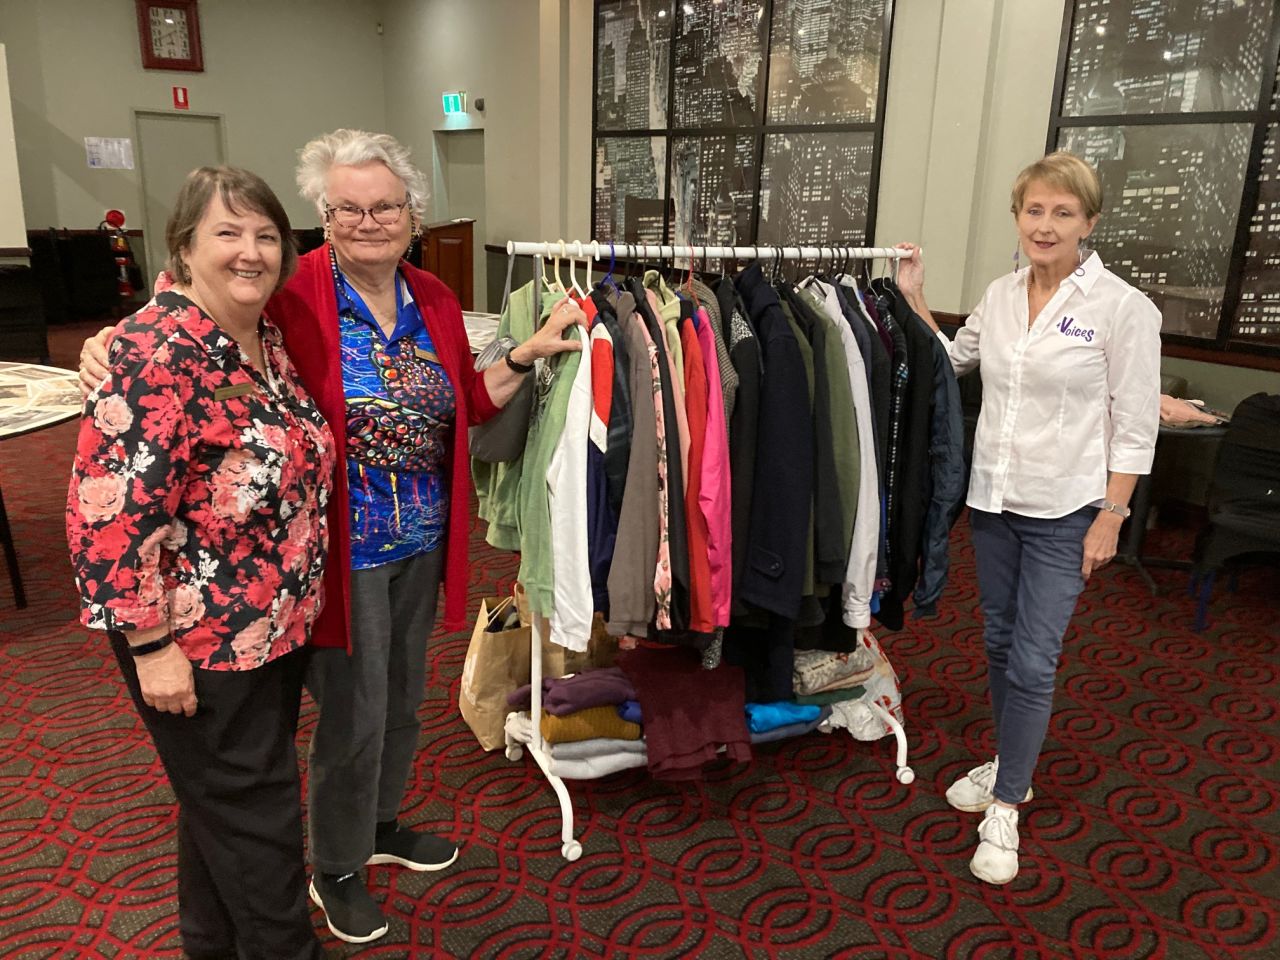 Winter Coat Drive in May resulted in over 50 items donated to not-for-profit organisation 4 Voices. L-R Freya Tienan, Coorparoo Branch President; Barb Marshall, branch member; Jo Westh, 4 Voices Global